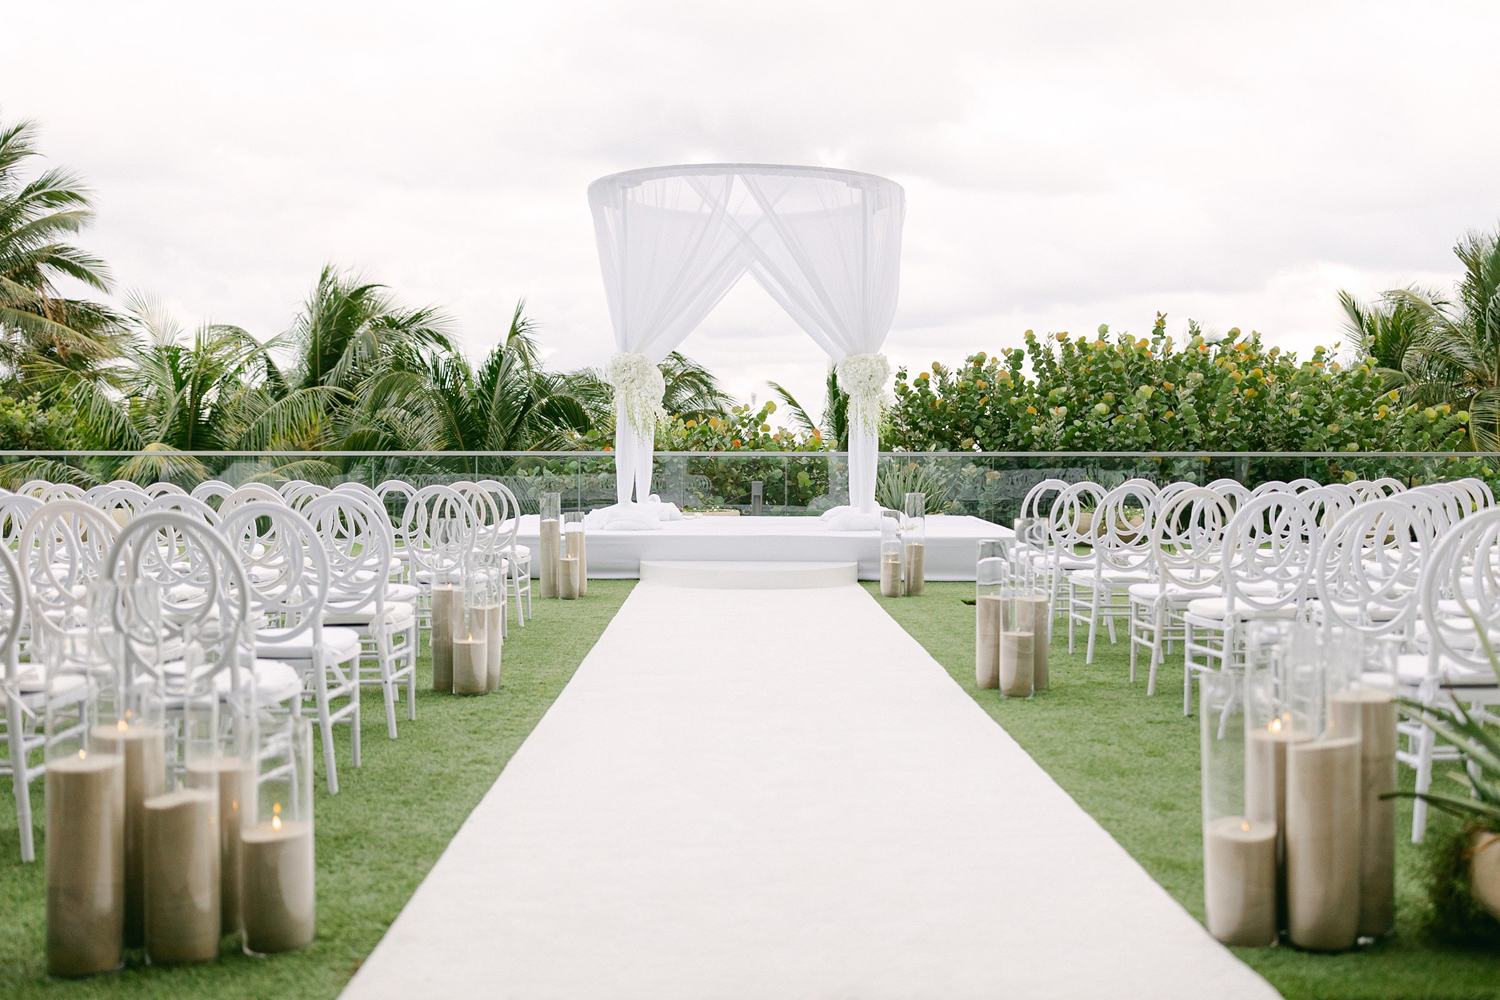 Wide angle perspective of the white orchid ceremony at the hotel terrace